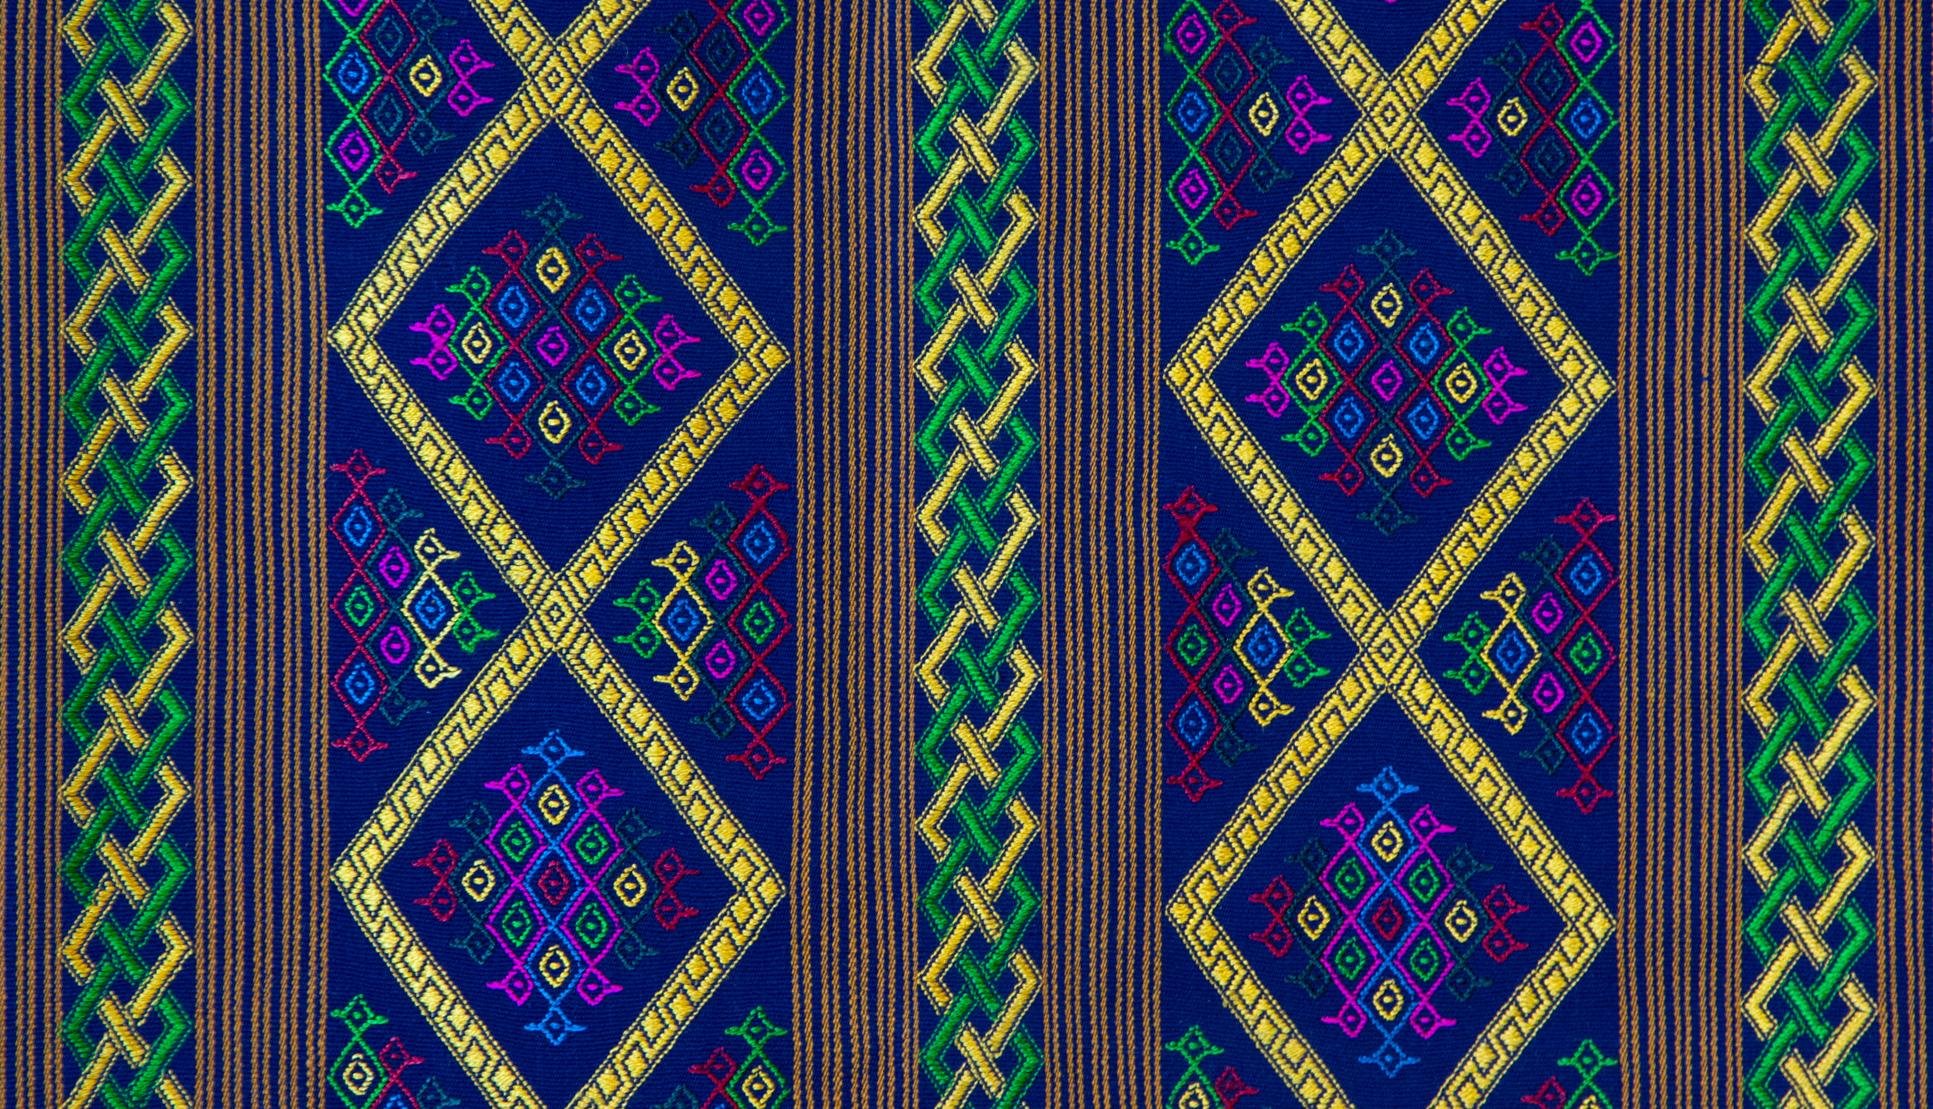 Bhutanese silk woven kira textile, purple. From the royal weavers of Bhutan, this kira textile is a rectangular weaving worn as an ankle length dress by Bhutanese women. This example was originally woven for Her Majesty Gyalyum (Queen Mother) Sangay